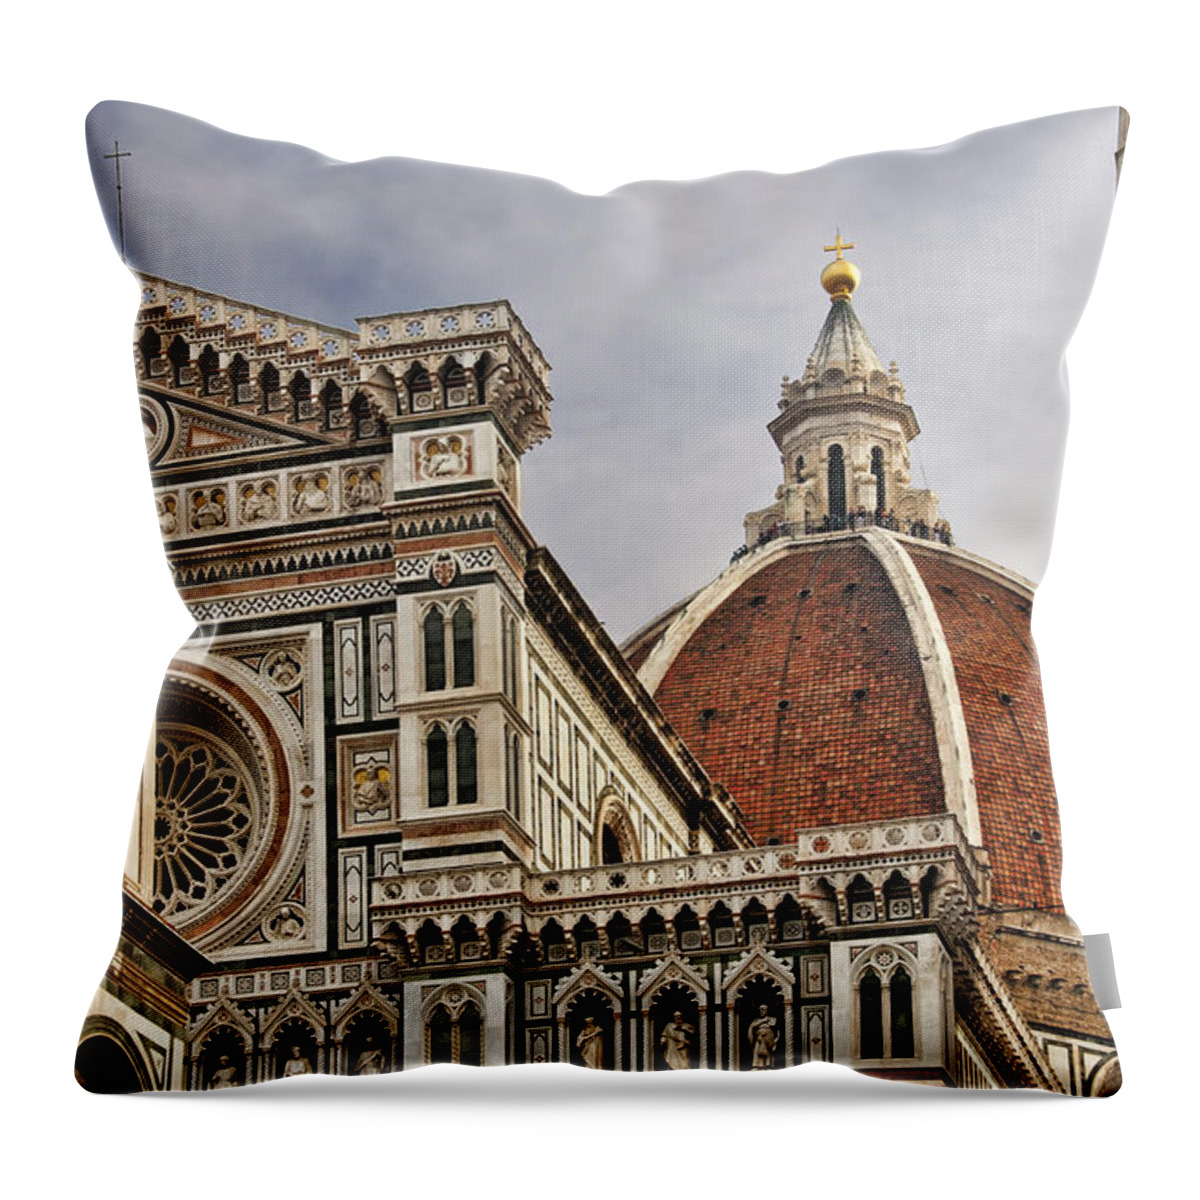 Florence Throw Pillow featuring the photograph Florence Duomo by Steven Sparks